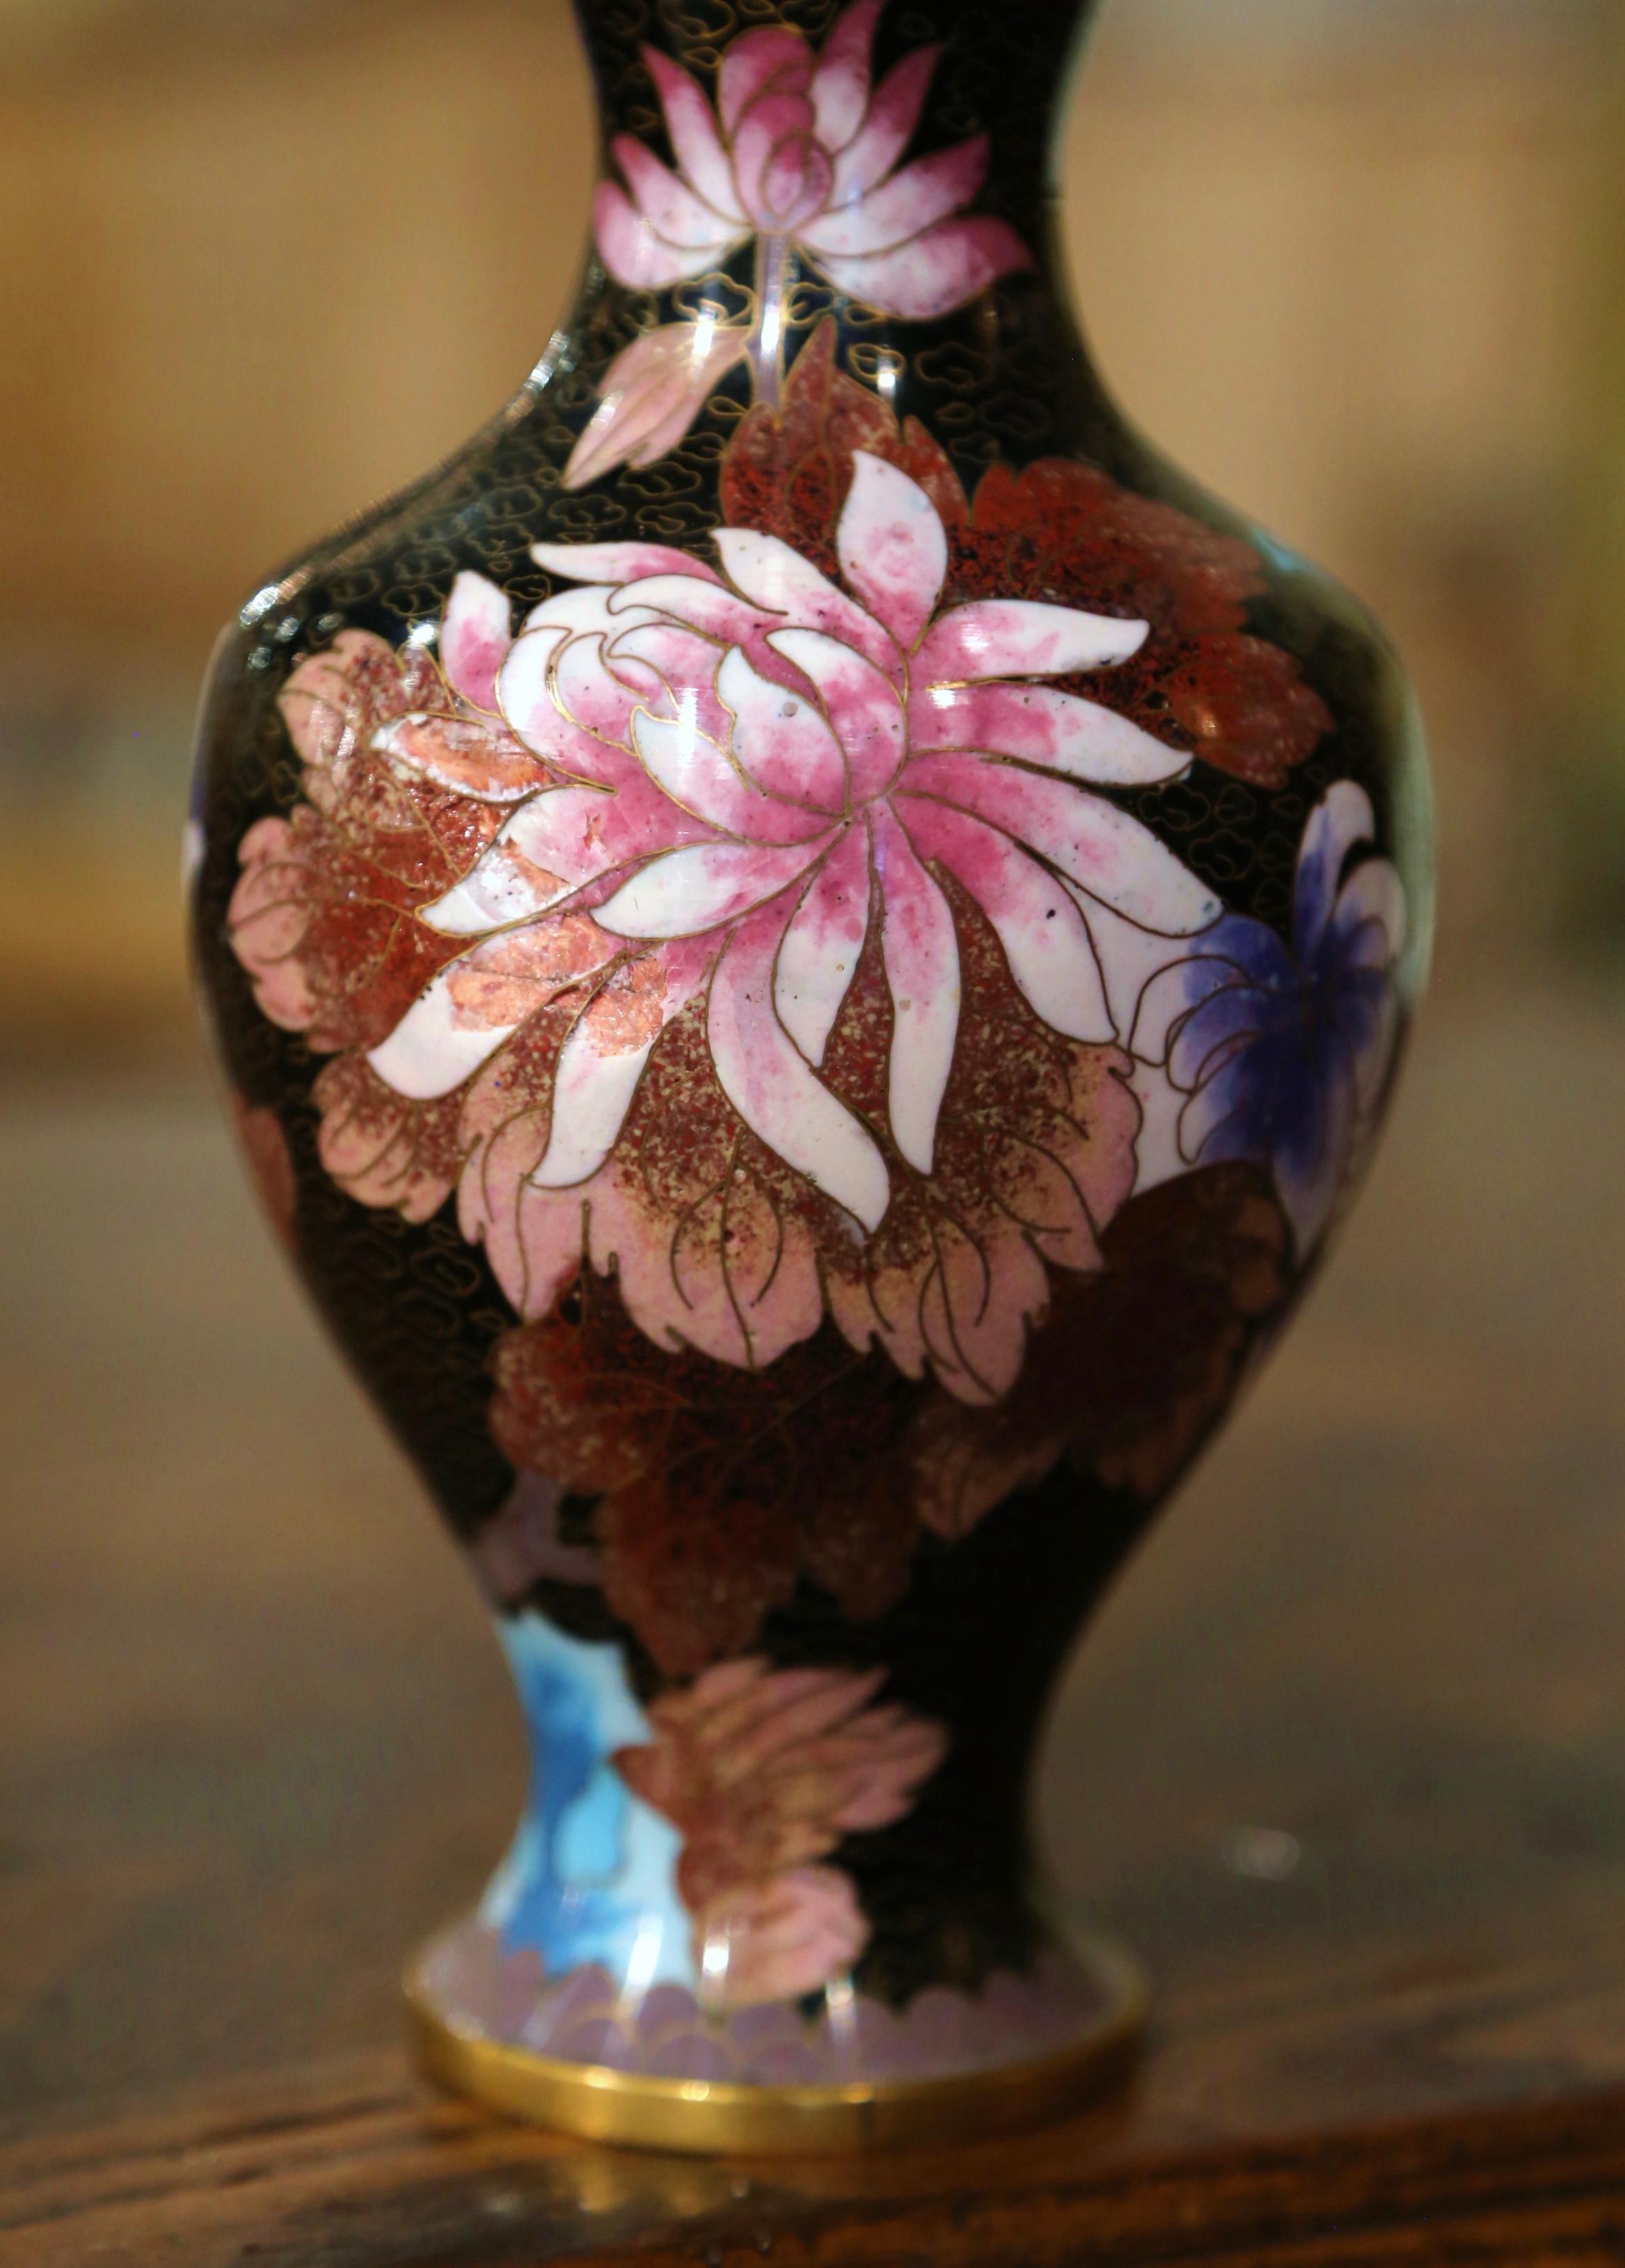  Vintage Chinese Cloisonne Enamel Vase with Floral and Leaf Motifs  In Excellent Condition For Sale In Dallas, TX